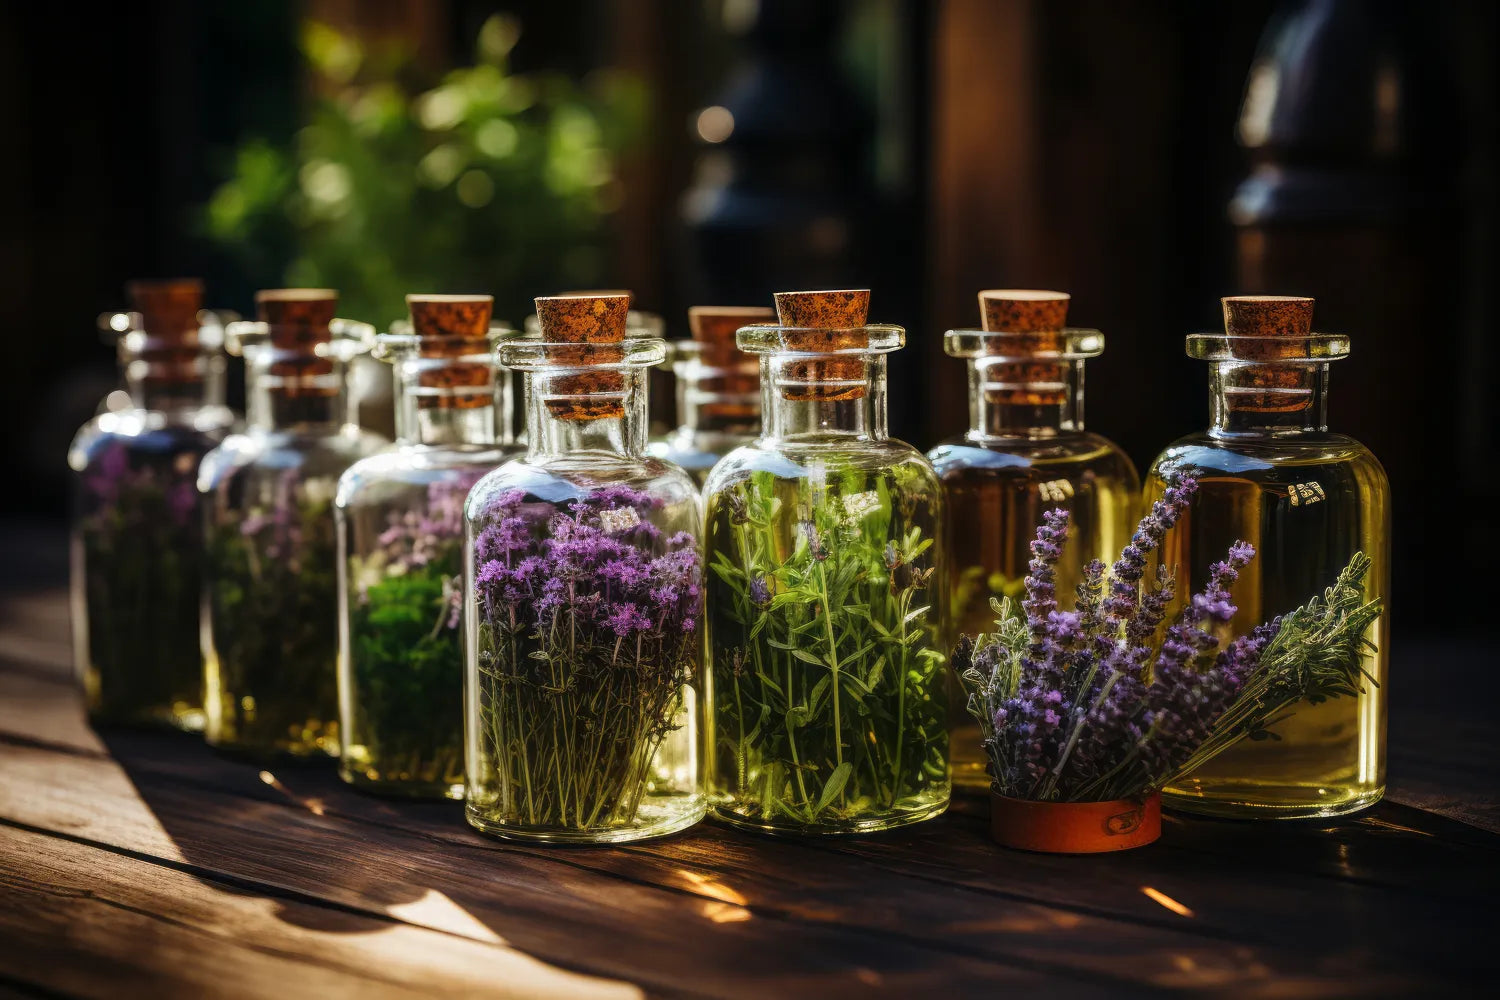 Herbalism (Phytotherapy): Guide to Folk Medicine